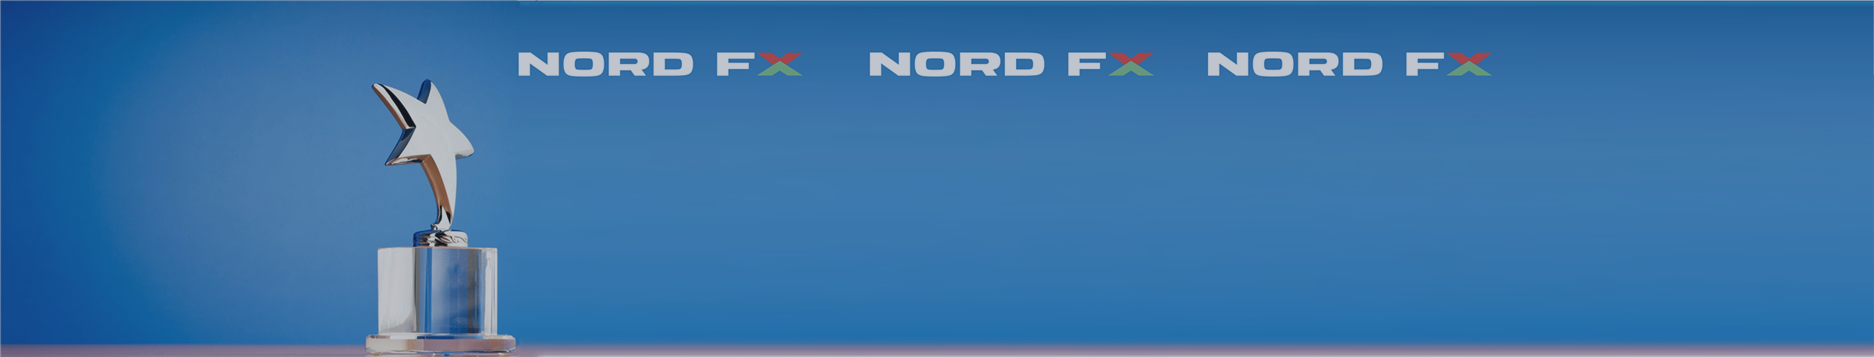 NordFX CopyTrading: 5,343% Profit from Gold Trades